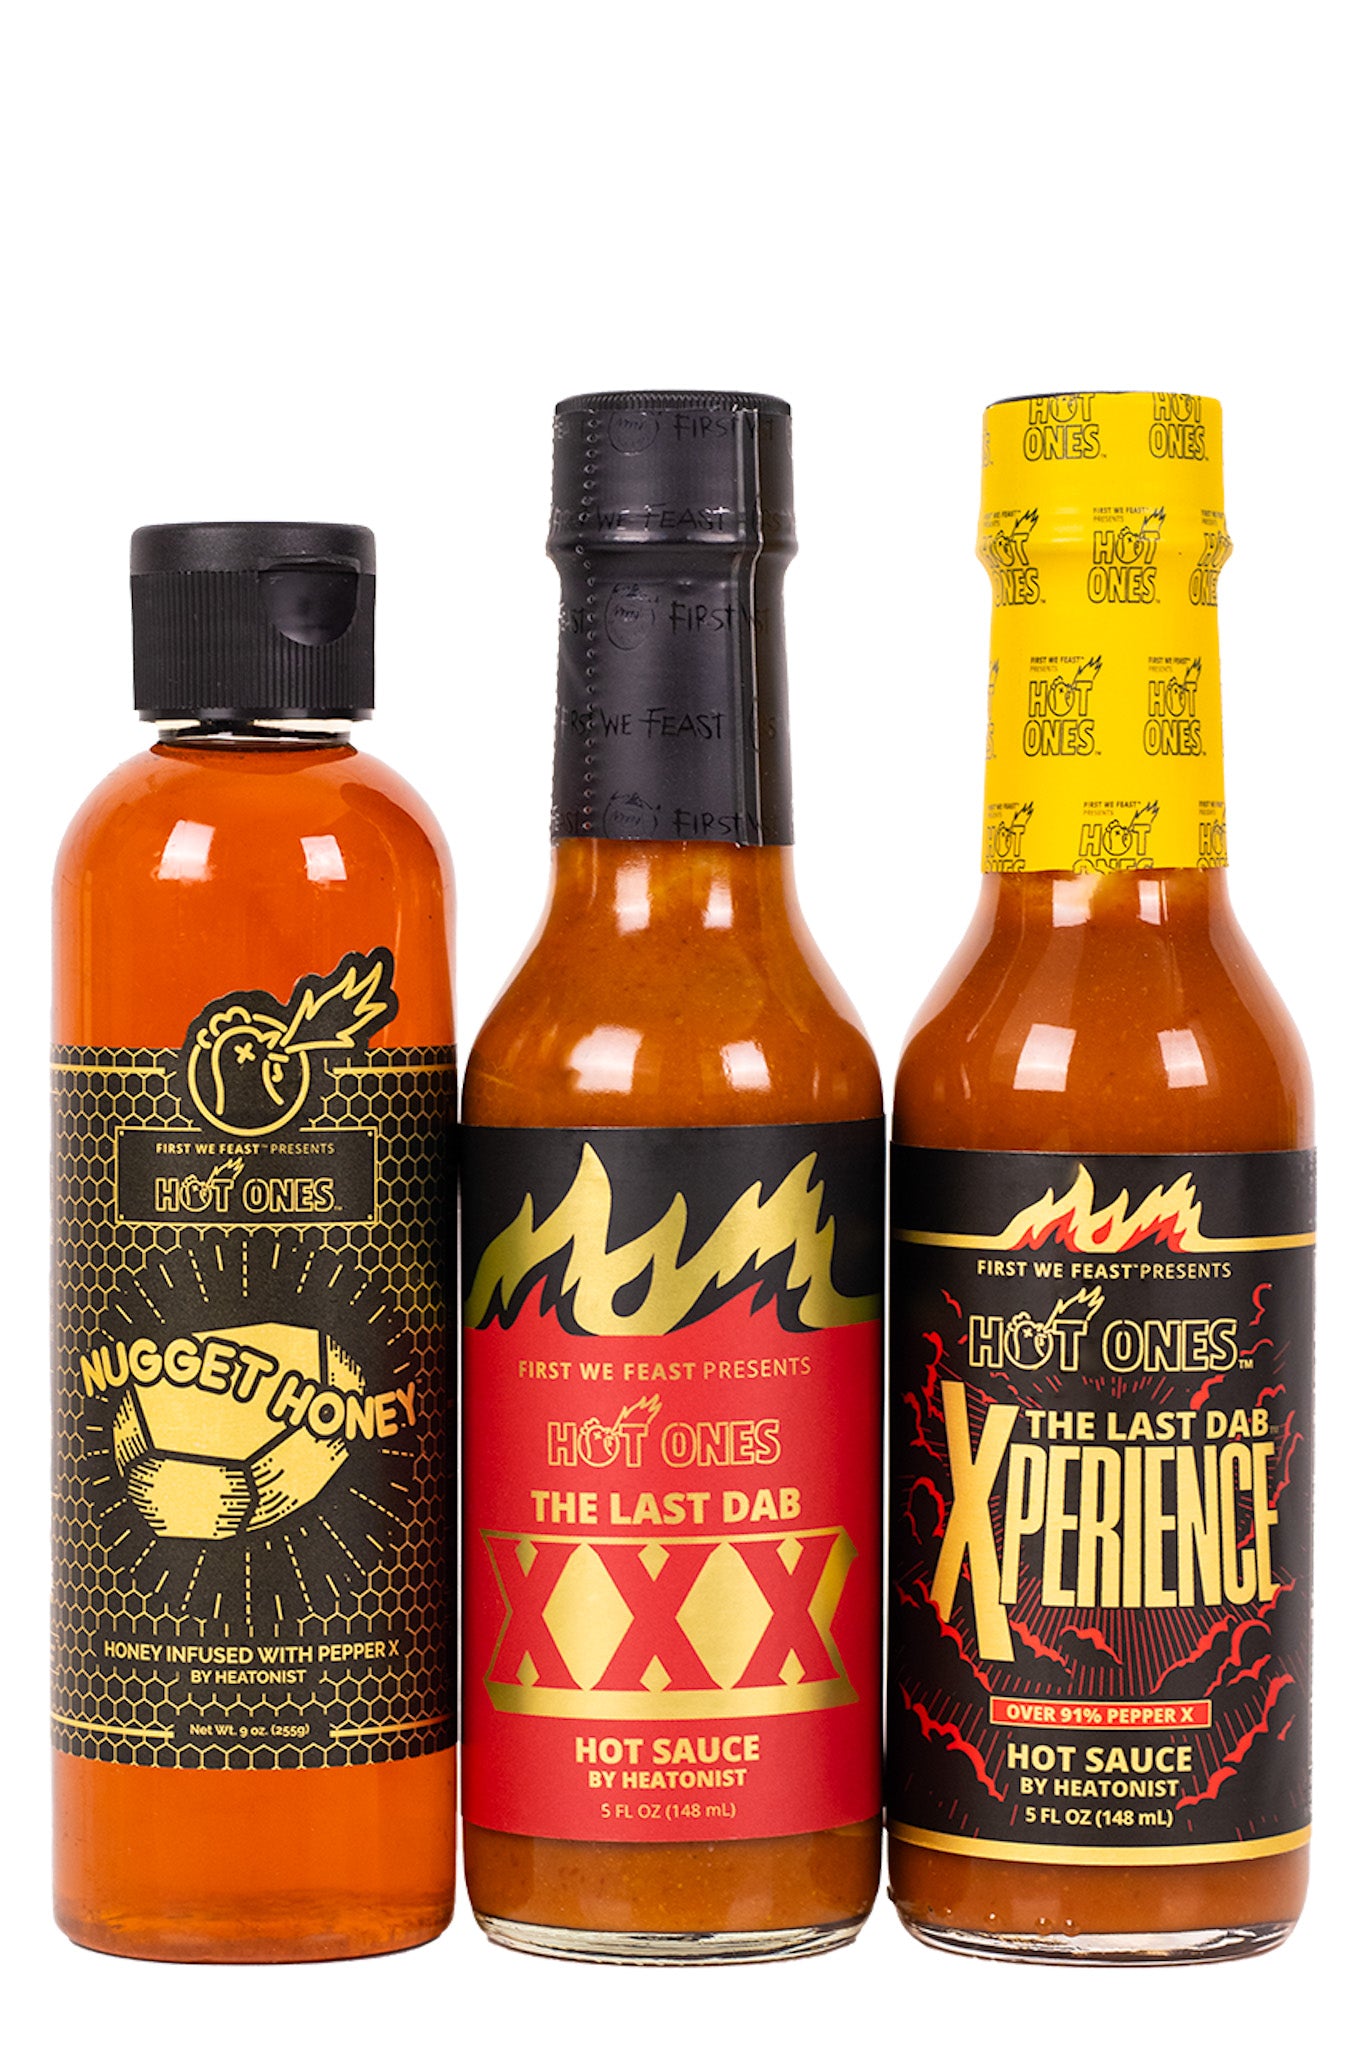 Siping Xxx Hot Video - Pepper X Trio Pack | Hot Ones Hot Sauce | HEATONIST